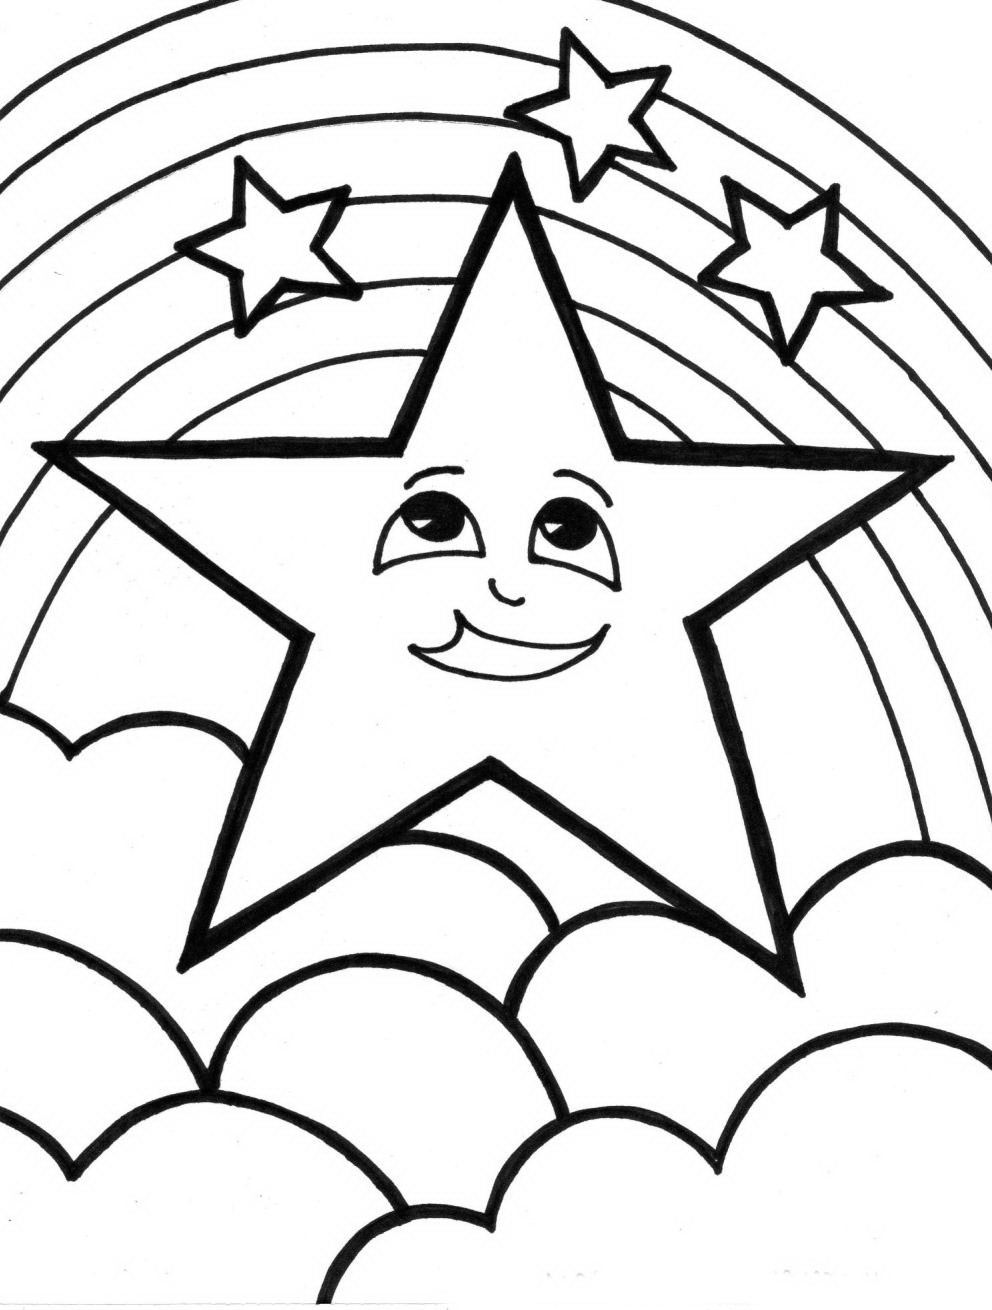 Rainbow Coloring Pages Printable
 Rainbow Coloring Pages for childrens printable for free